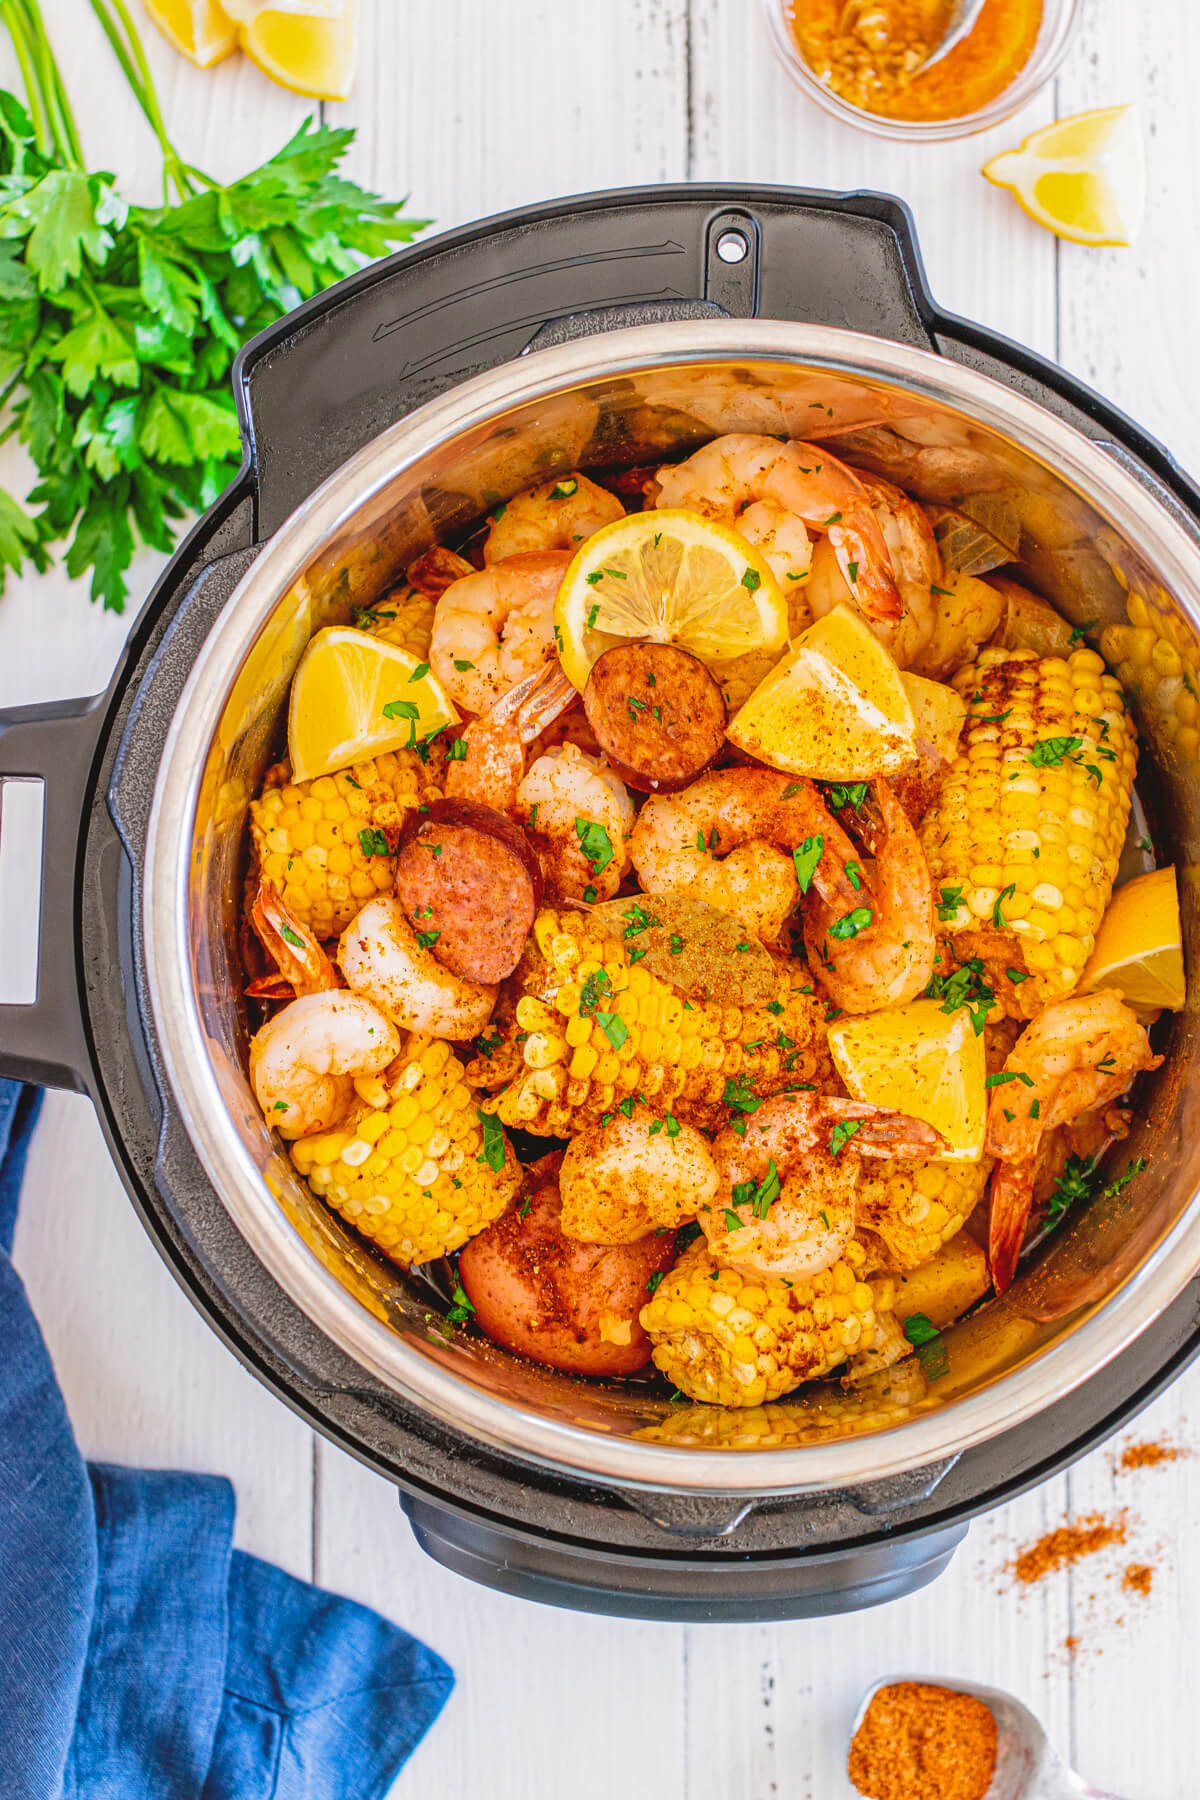 Cooked shrimp boil - Spice coated shrimp, potatoes, sausage, and corn in an Instant Pot.